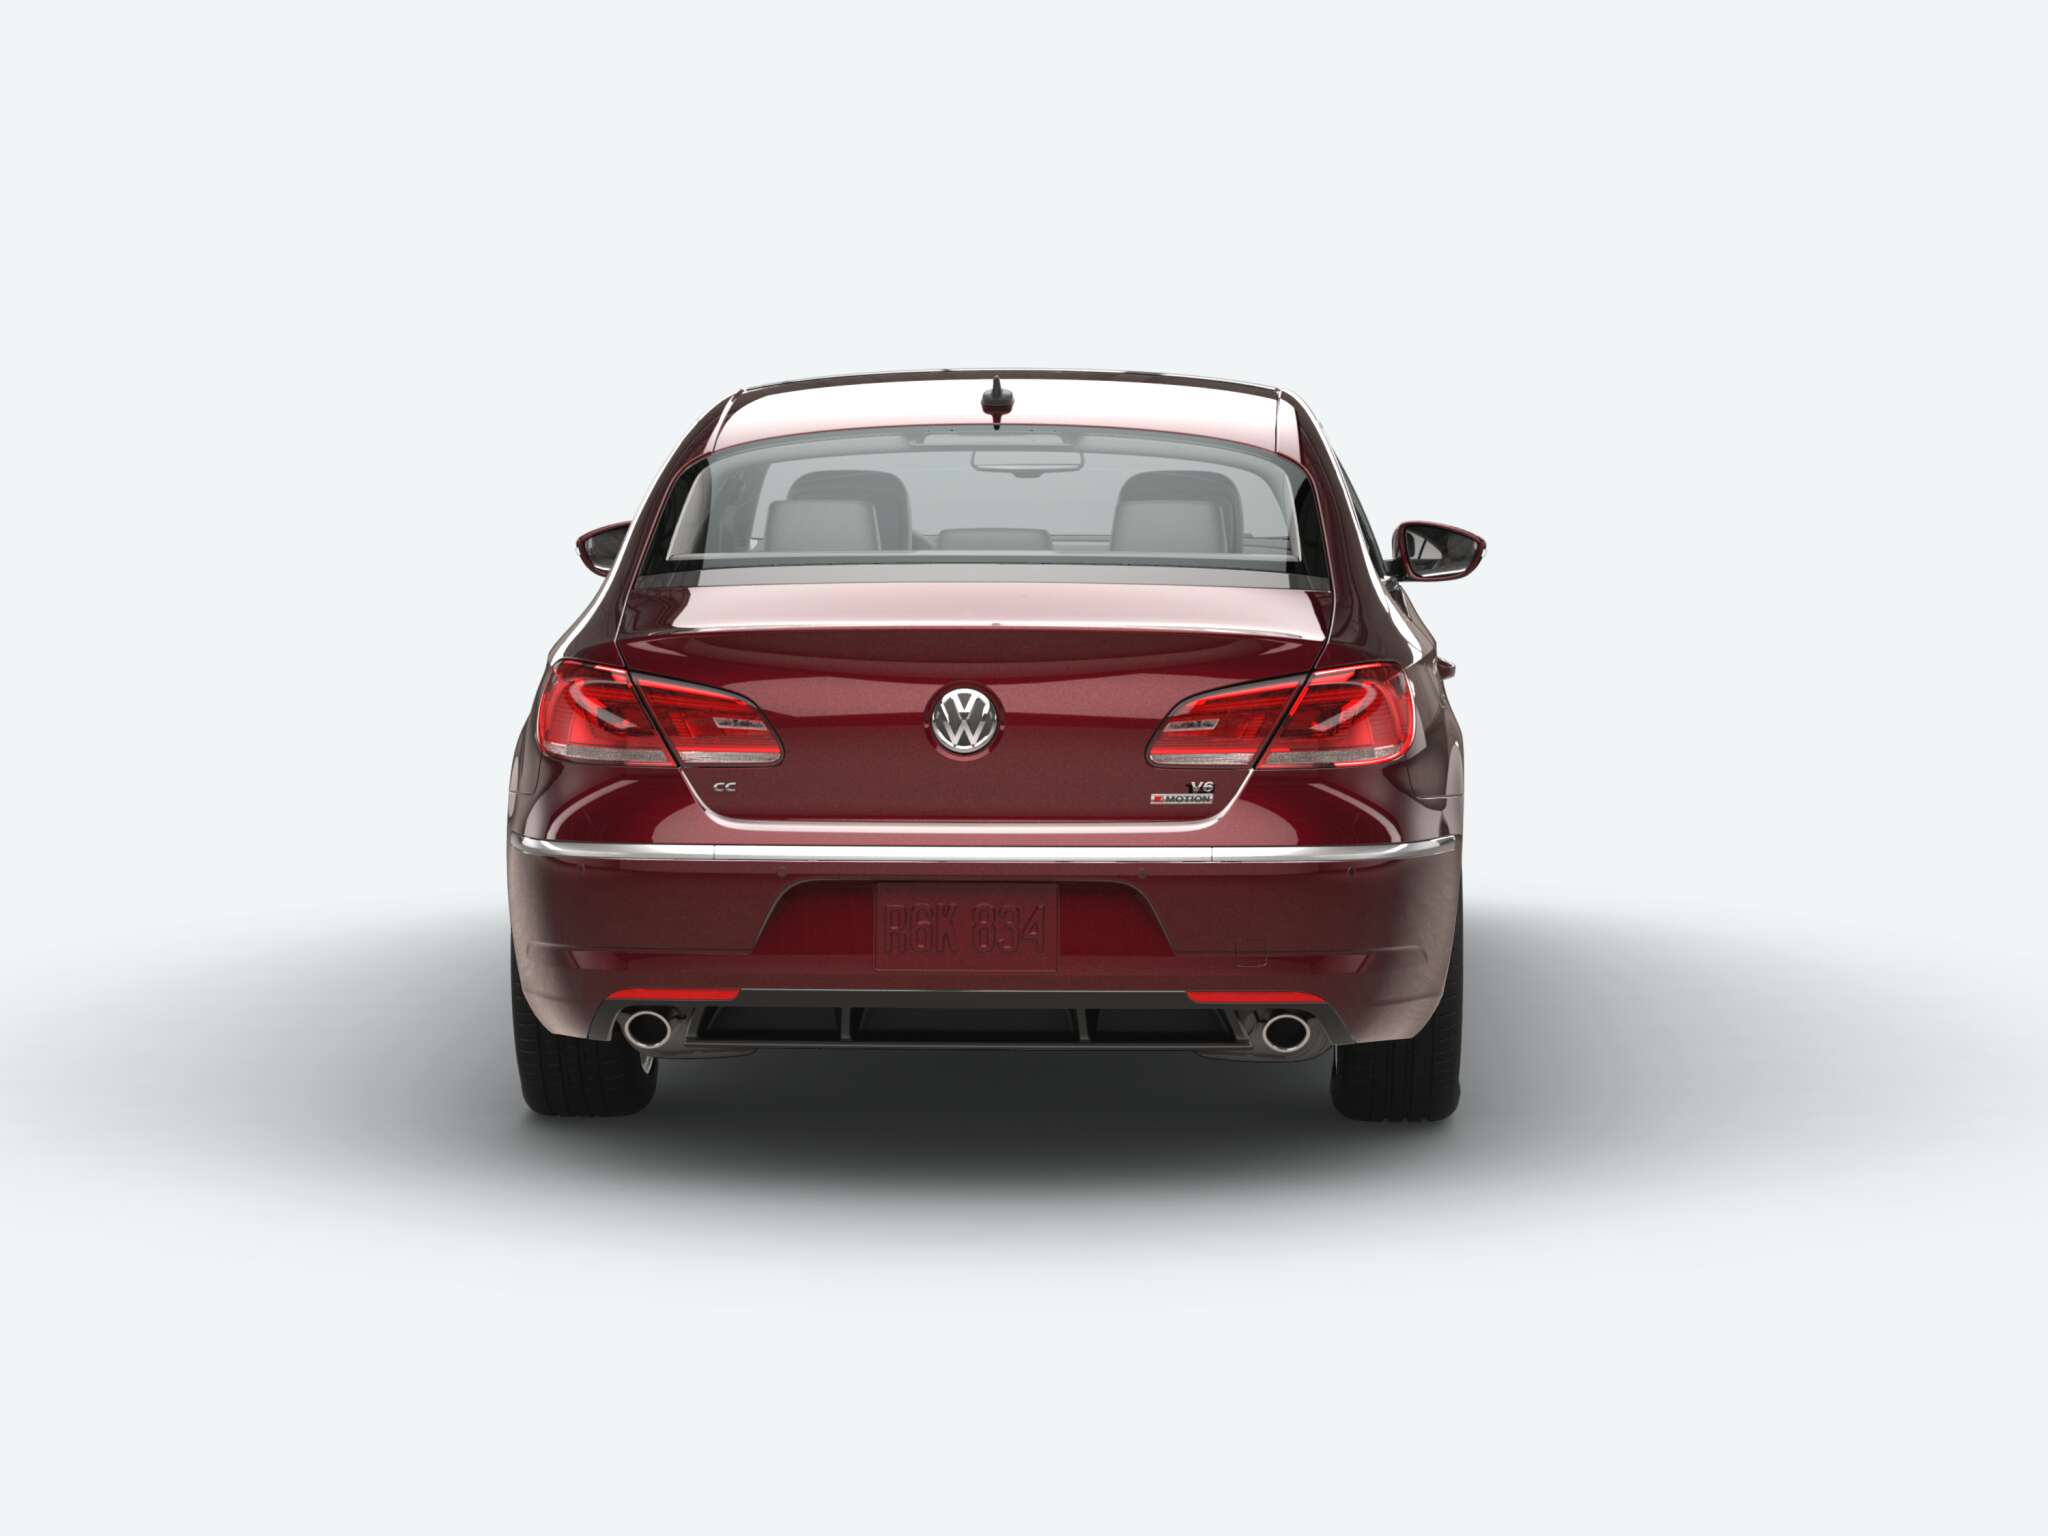 Volkswagen CC V6 Executive 4MOTION rear view